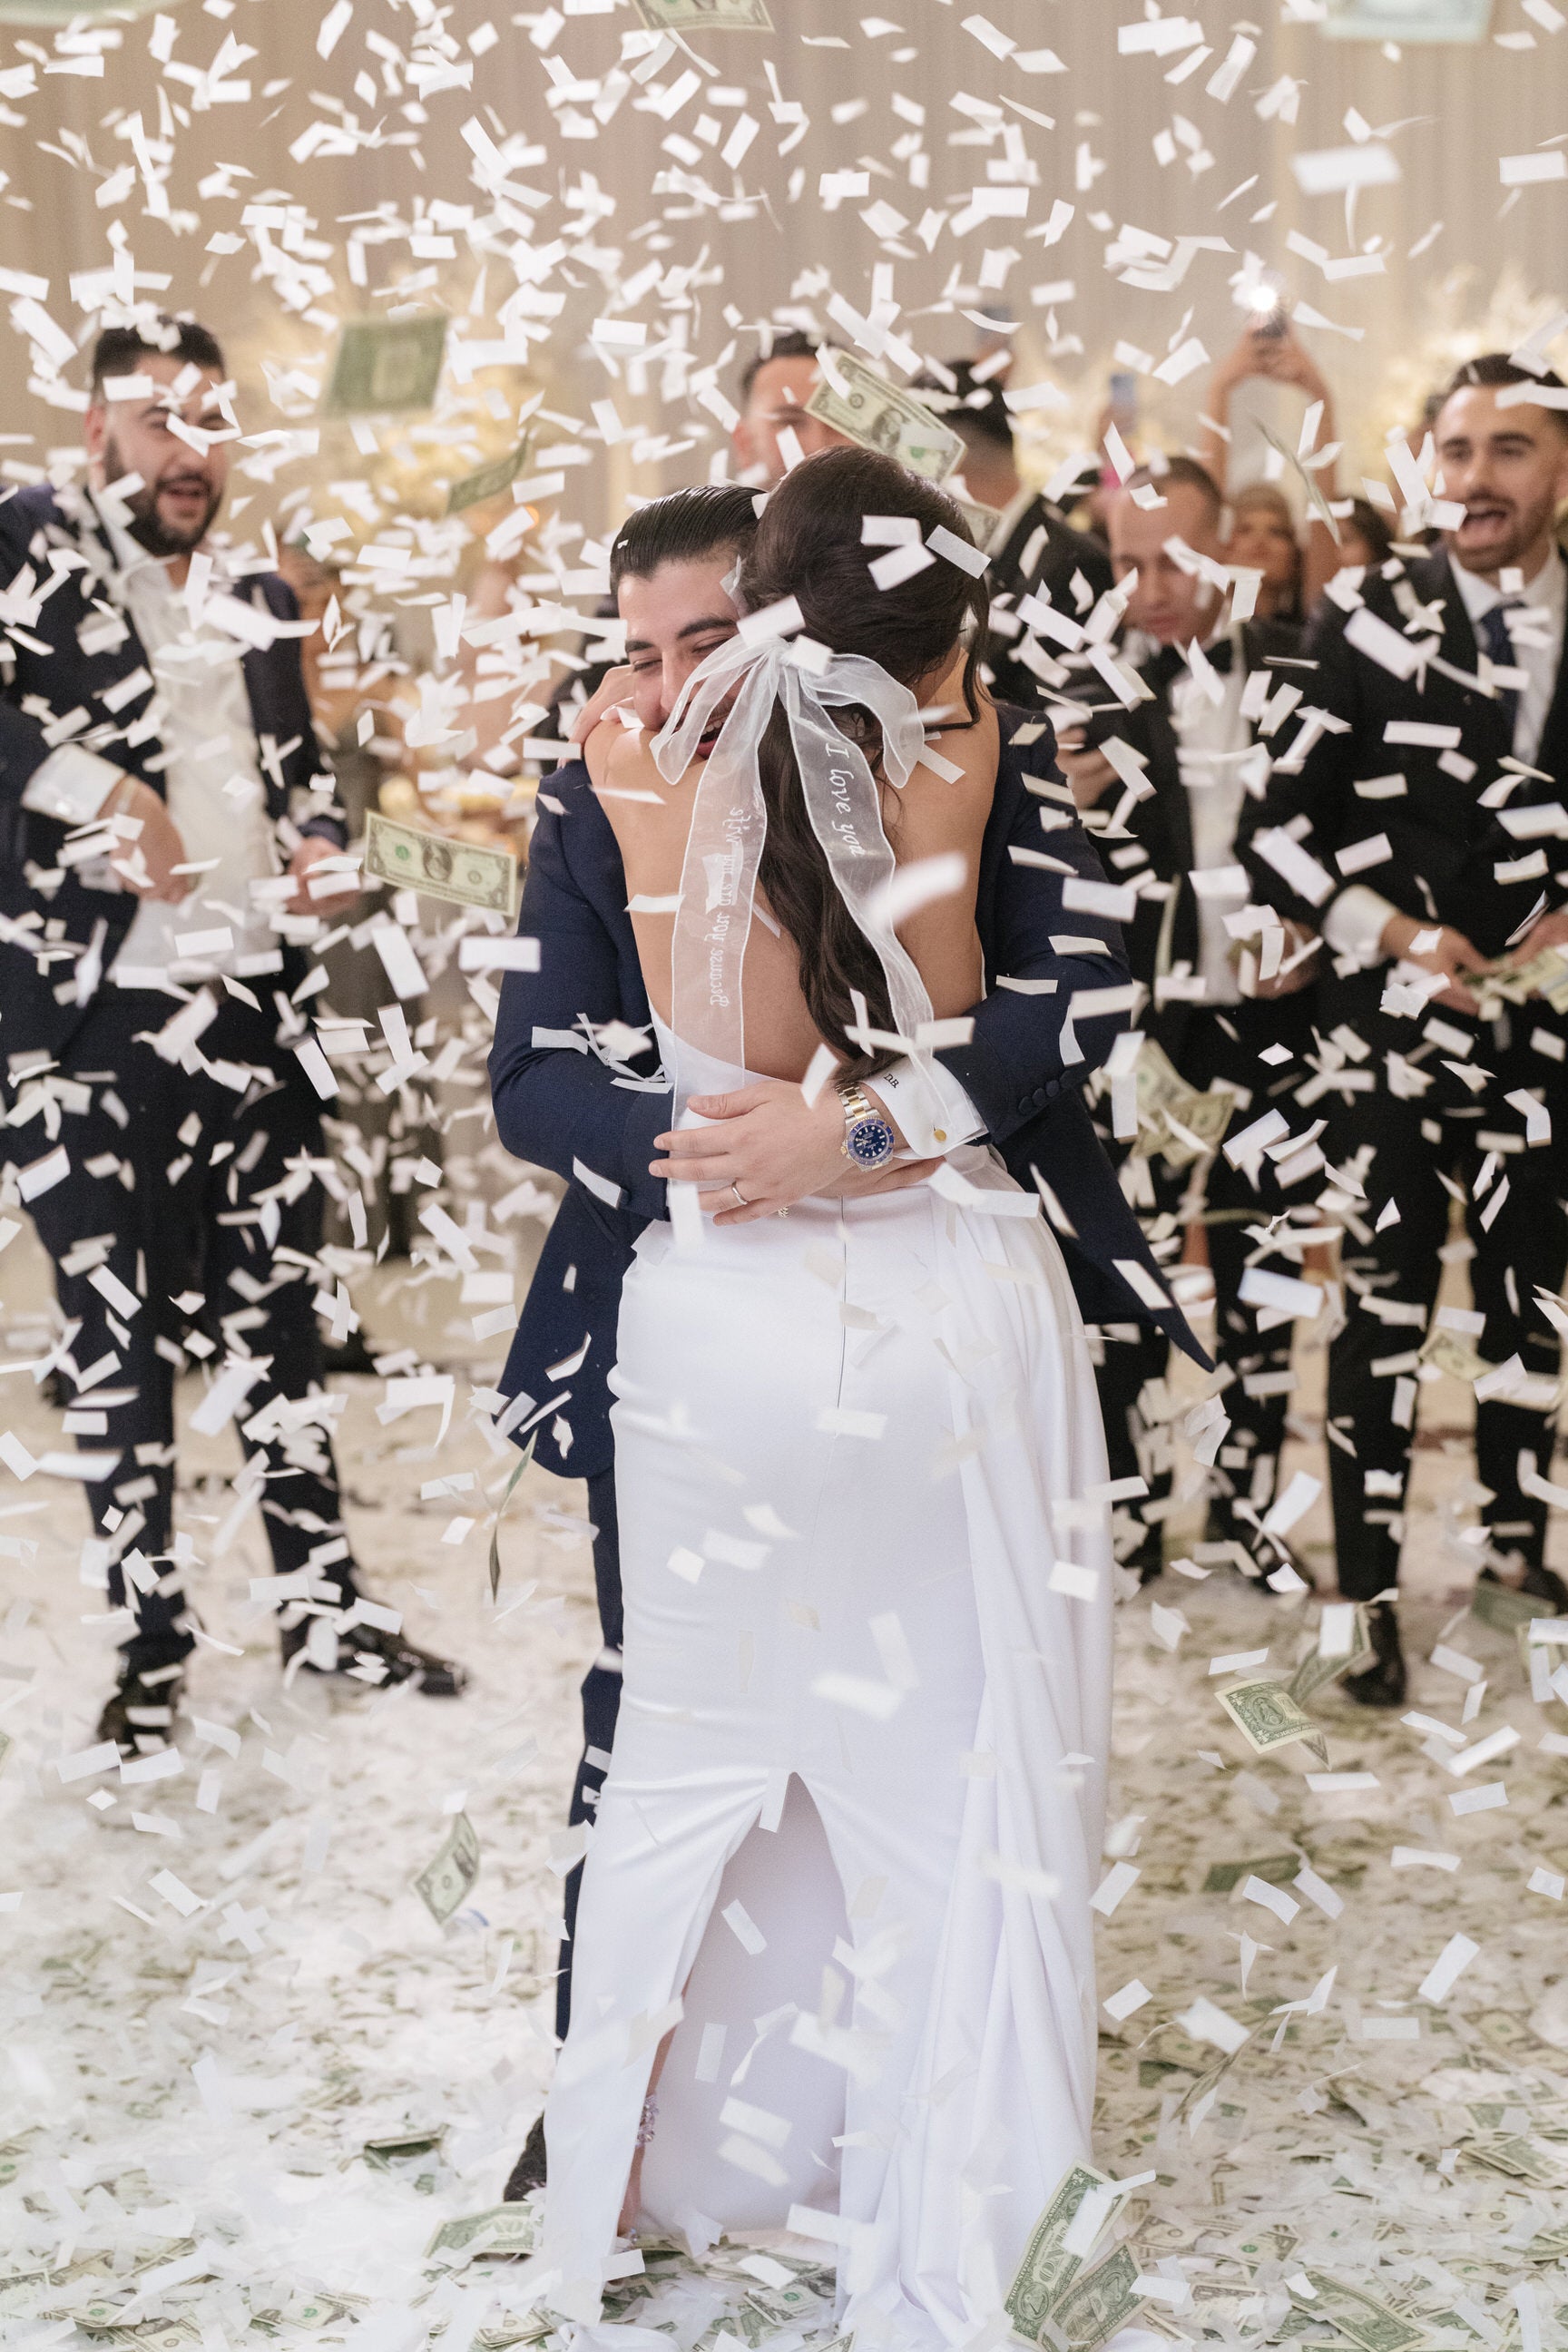 confetti and money toss with bride wearing white hair bow